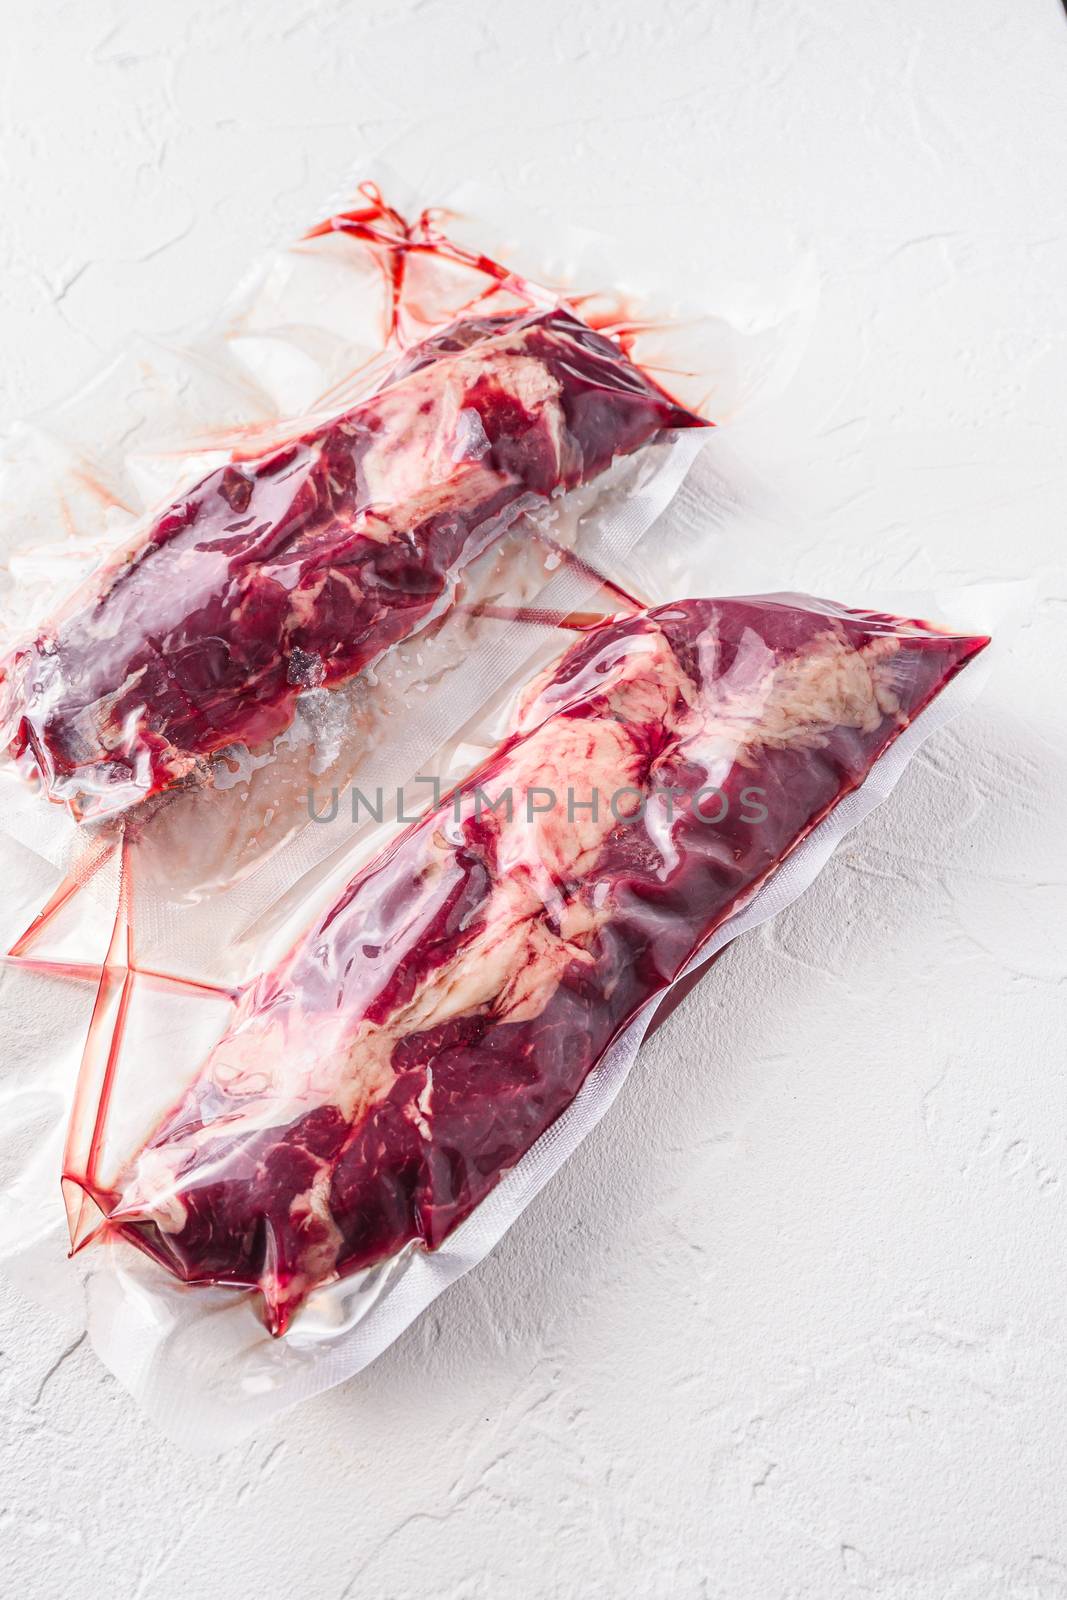 Pair of chuck roll beef steak, vacuum packed organic meat for sous vide cooking on white concrete textured background, side view. by Ilianesolenyi